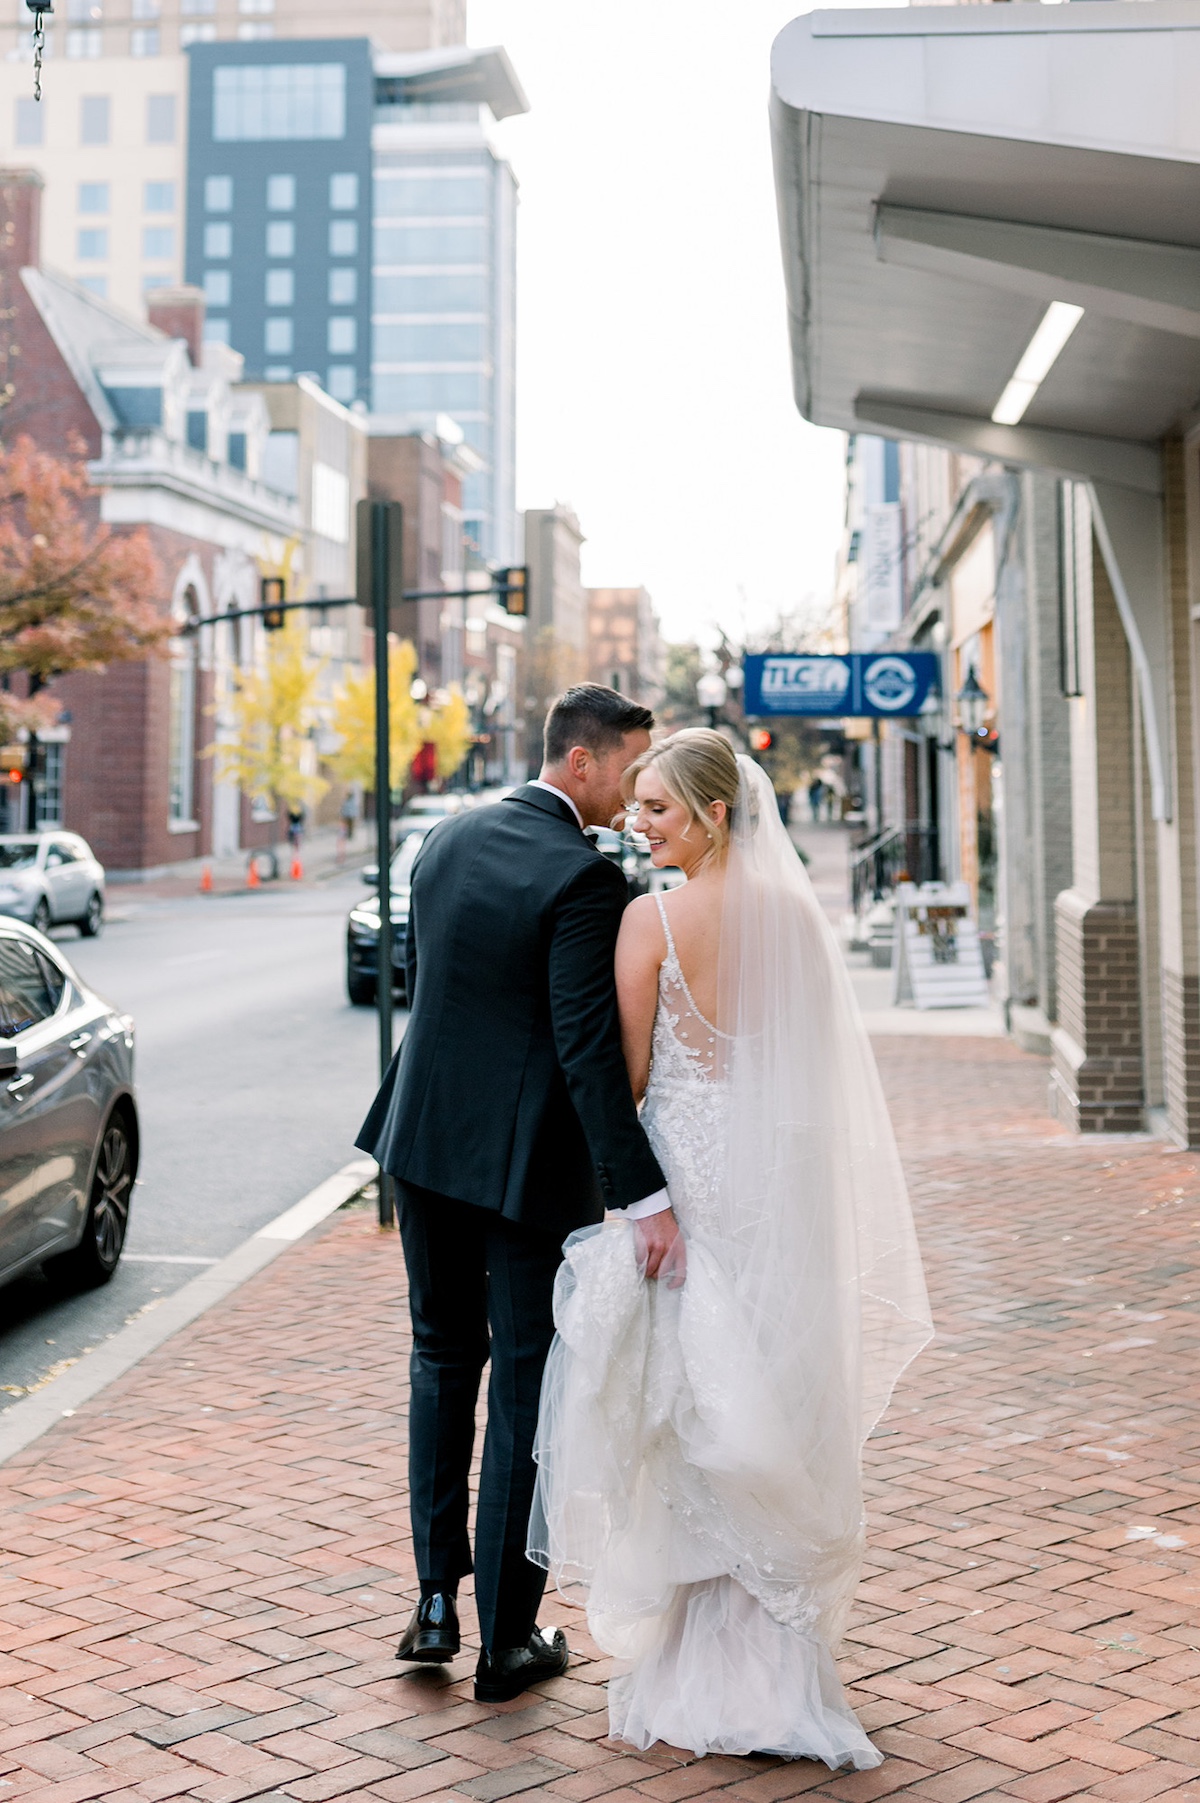 Cobblestone charm editorial portrait in Lancaster City, the bride and groom walking hand in hand, capturing the high-end romance of city life.